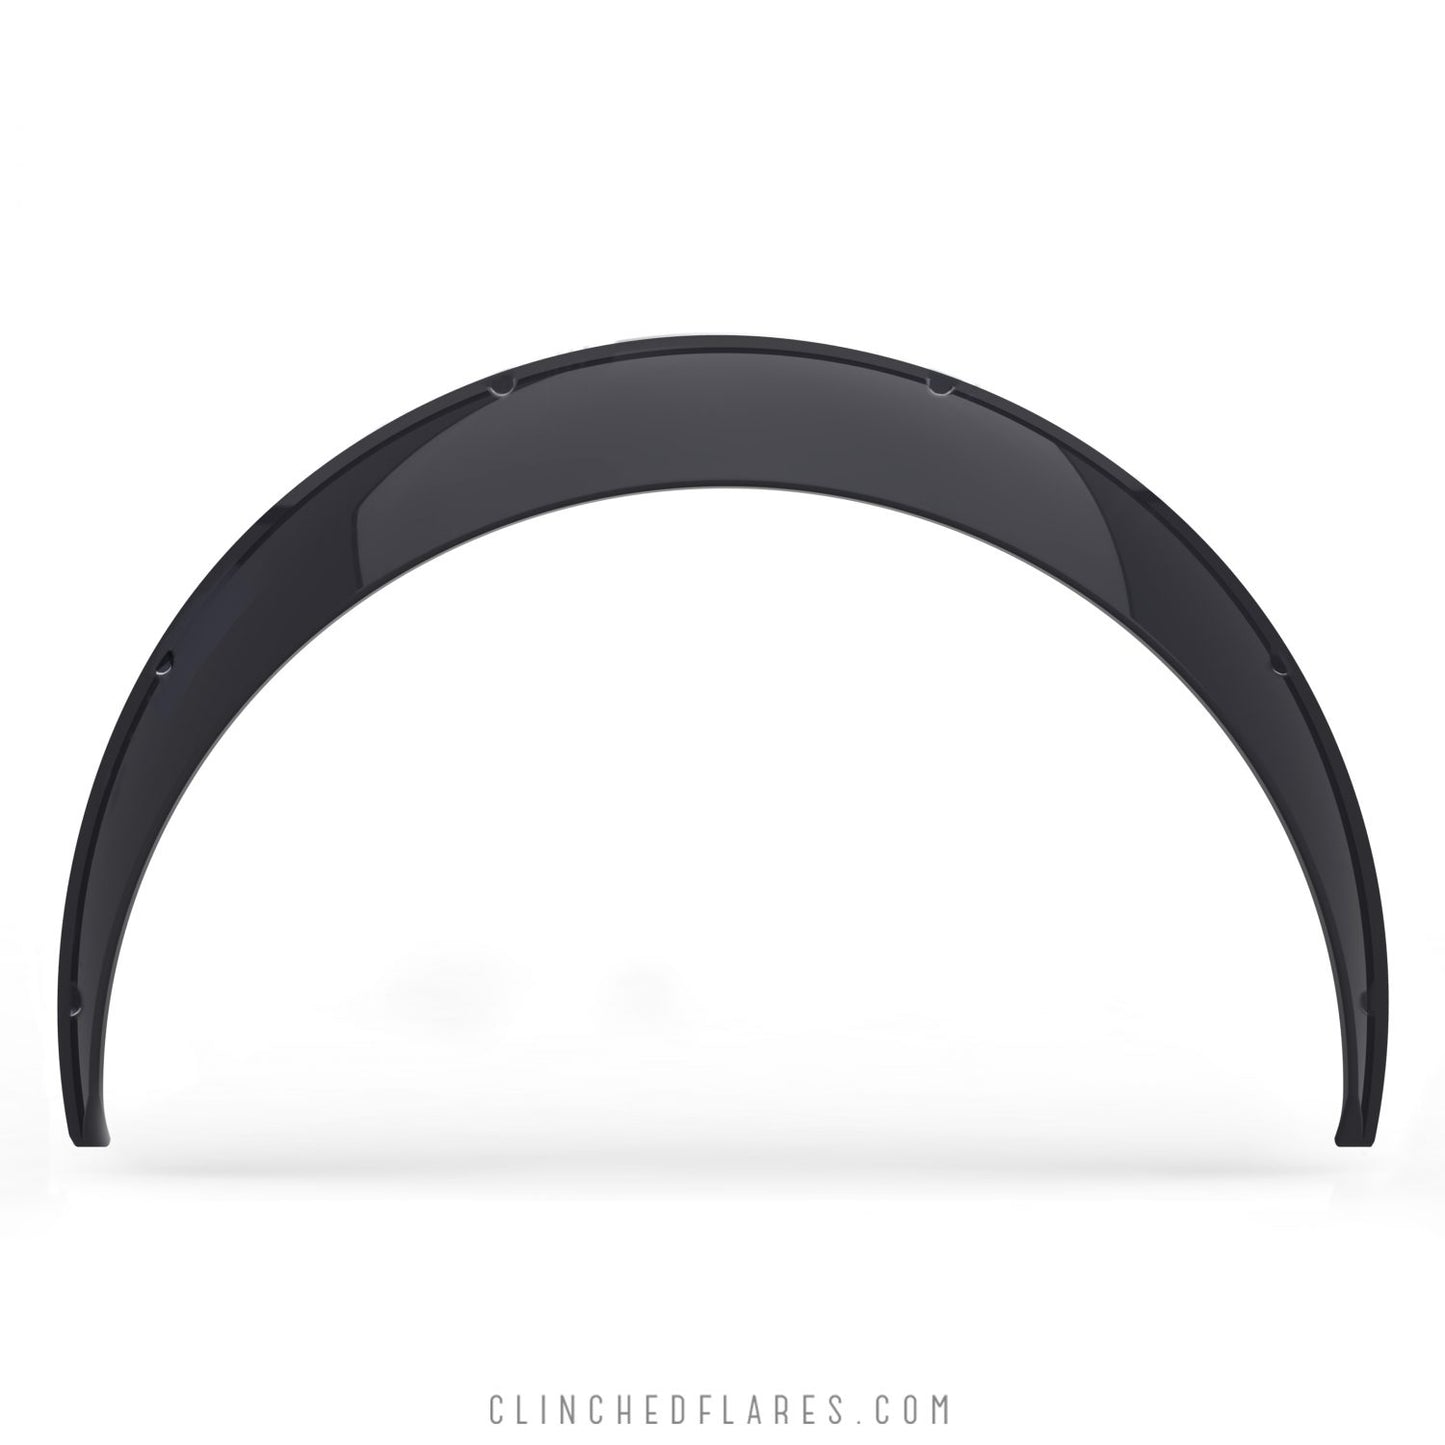 Clinched “Classic” 9cm (3.5″) Fender Flares